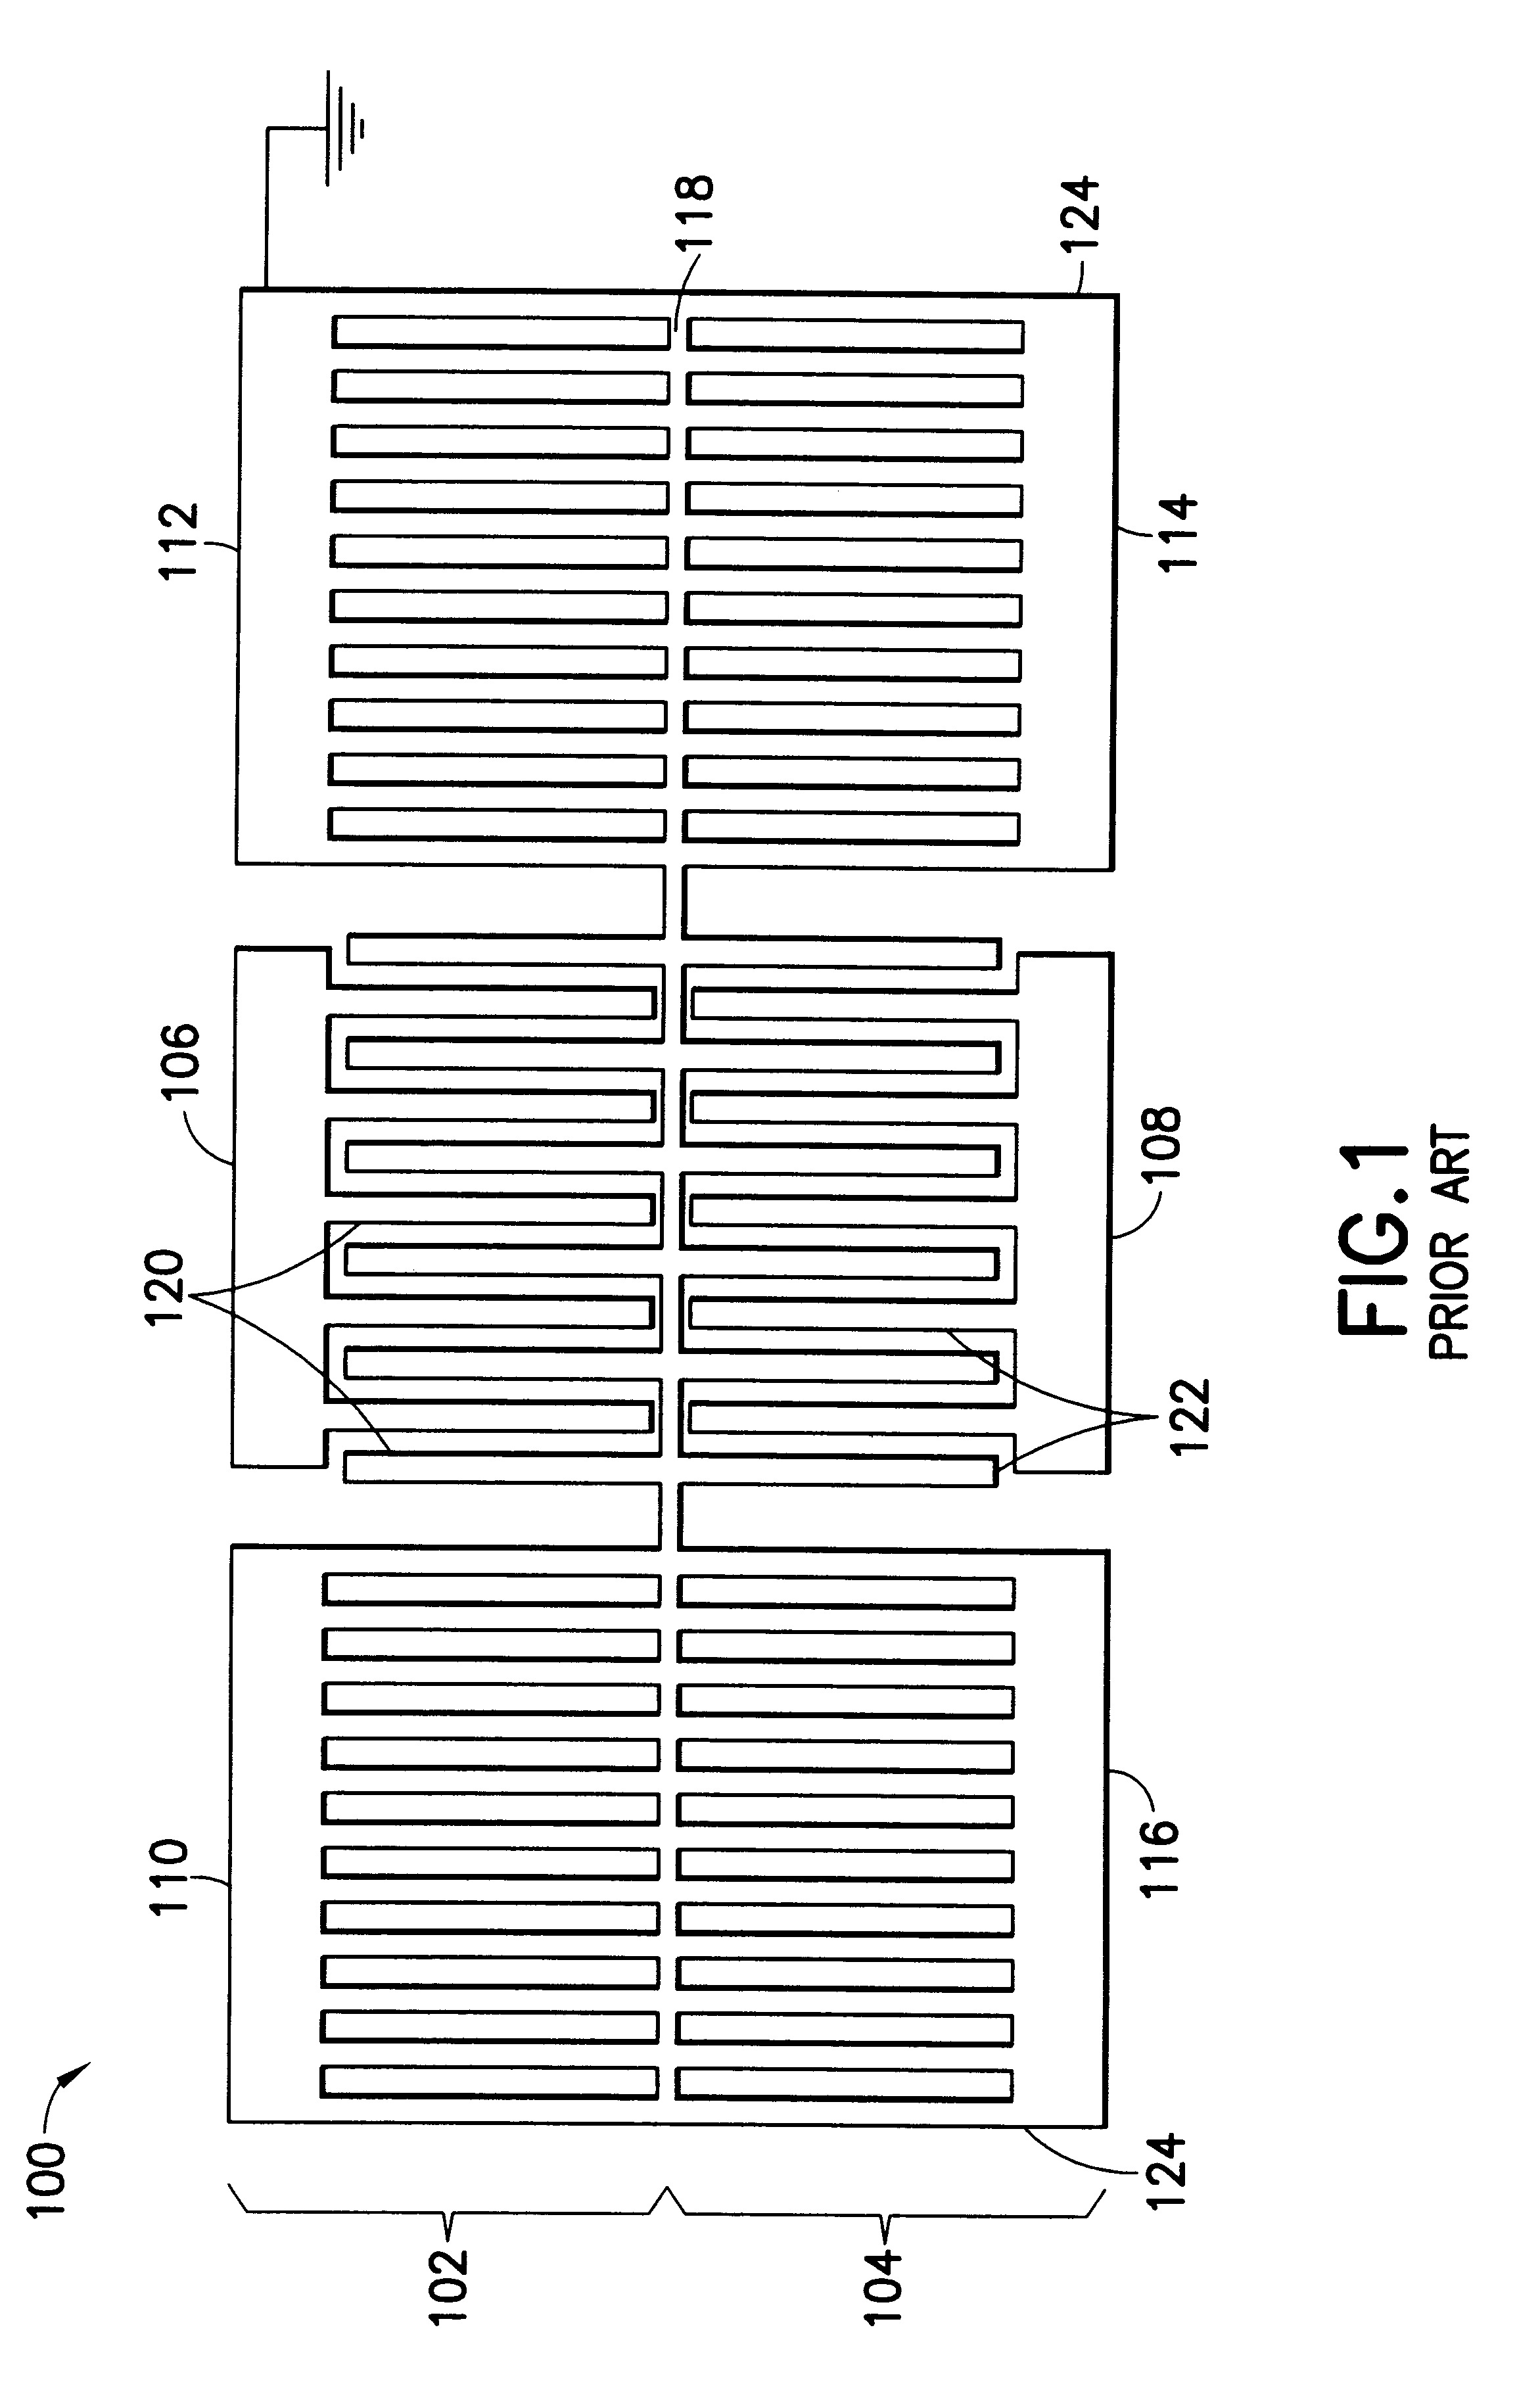 Electro-acoustic device with a variable acoustic wave velocity piezoelectric substrate